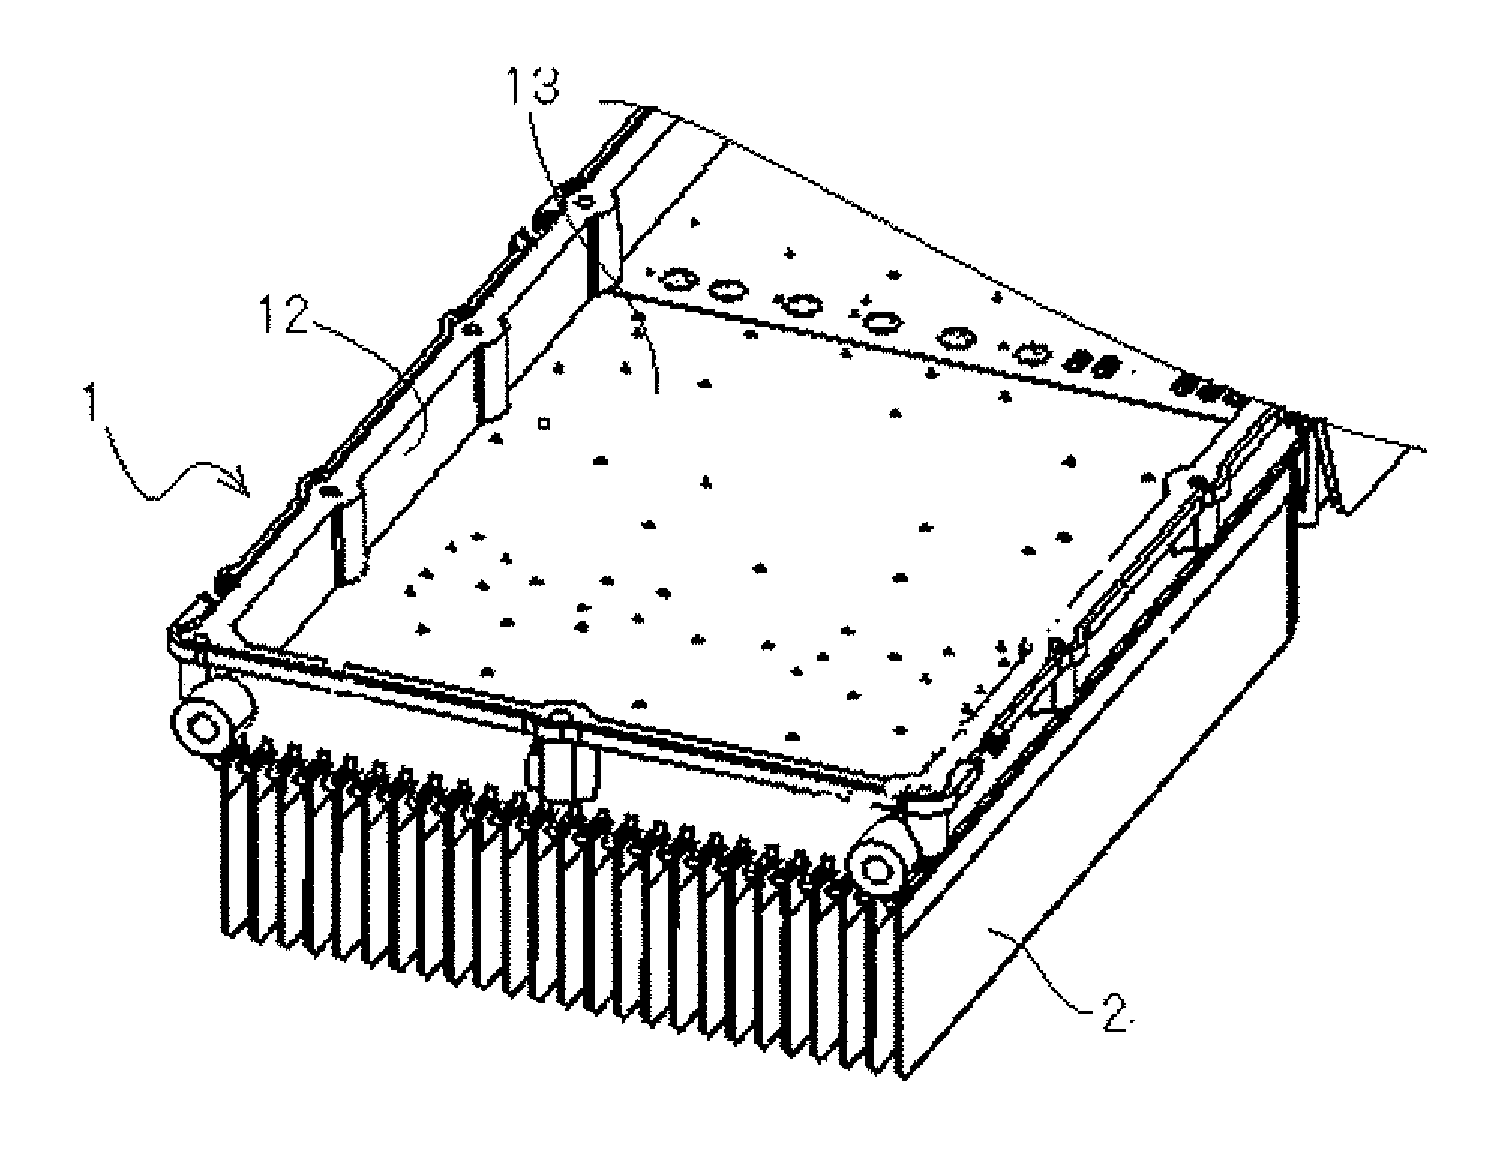 A heat dissipating enclosure with integrated cooling fins